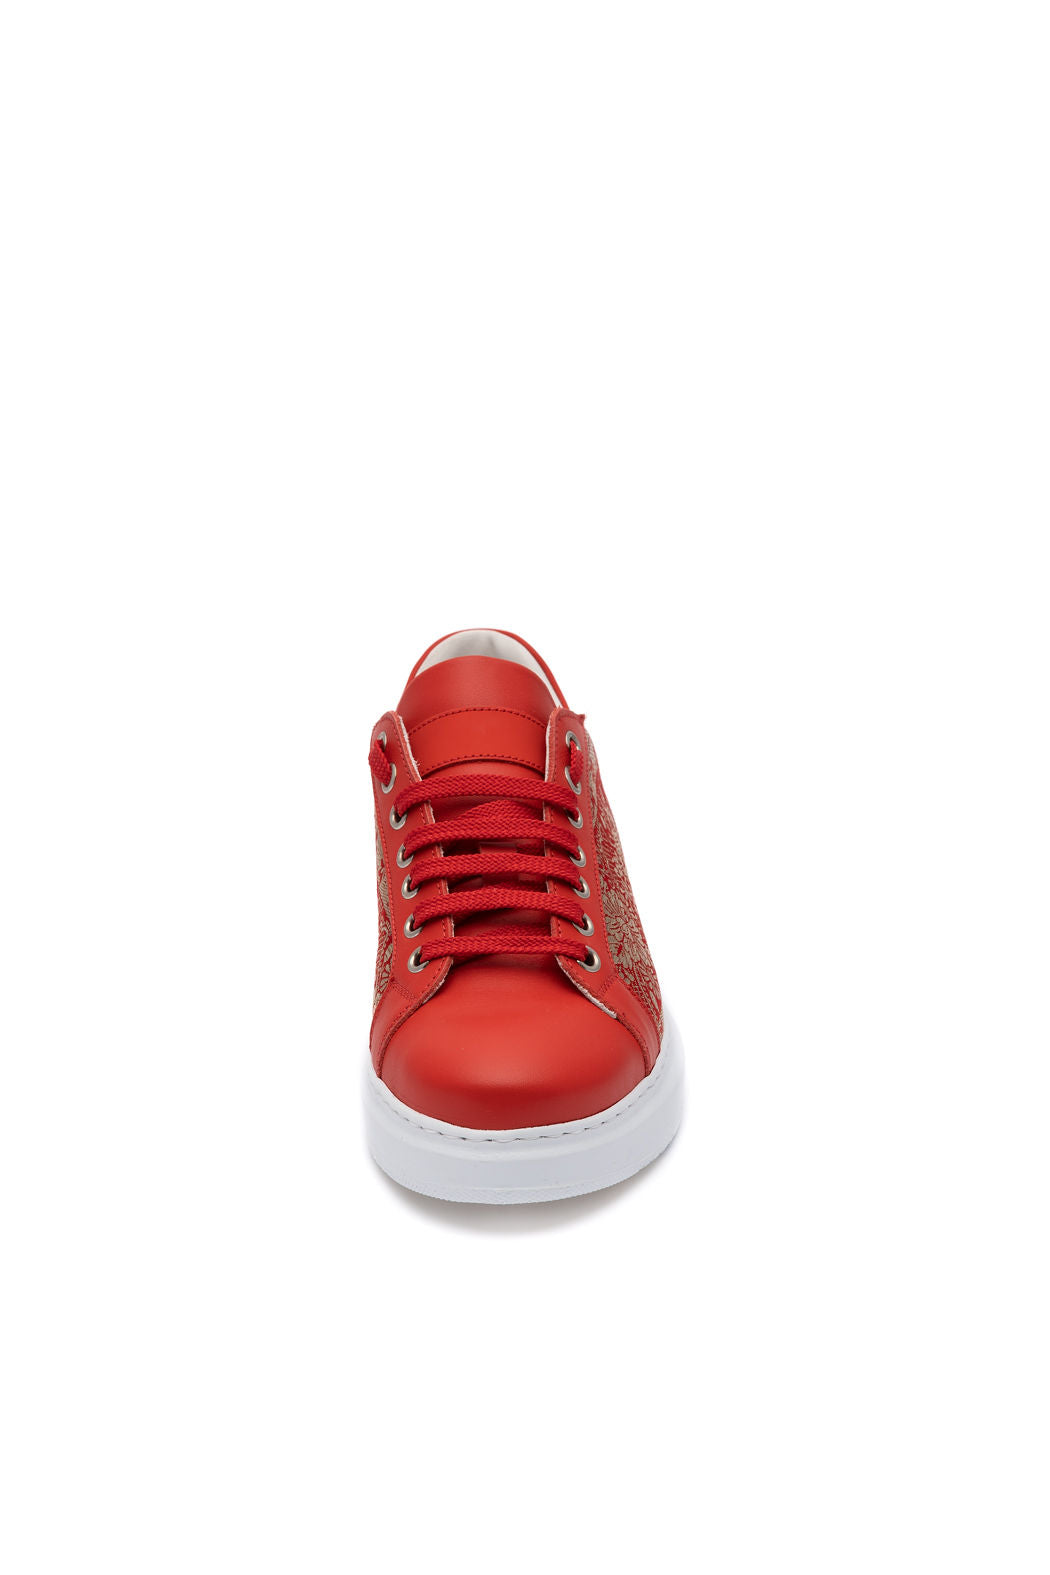 ALICE Red and Gold Platform Sneakers